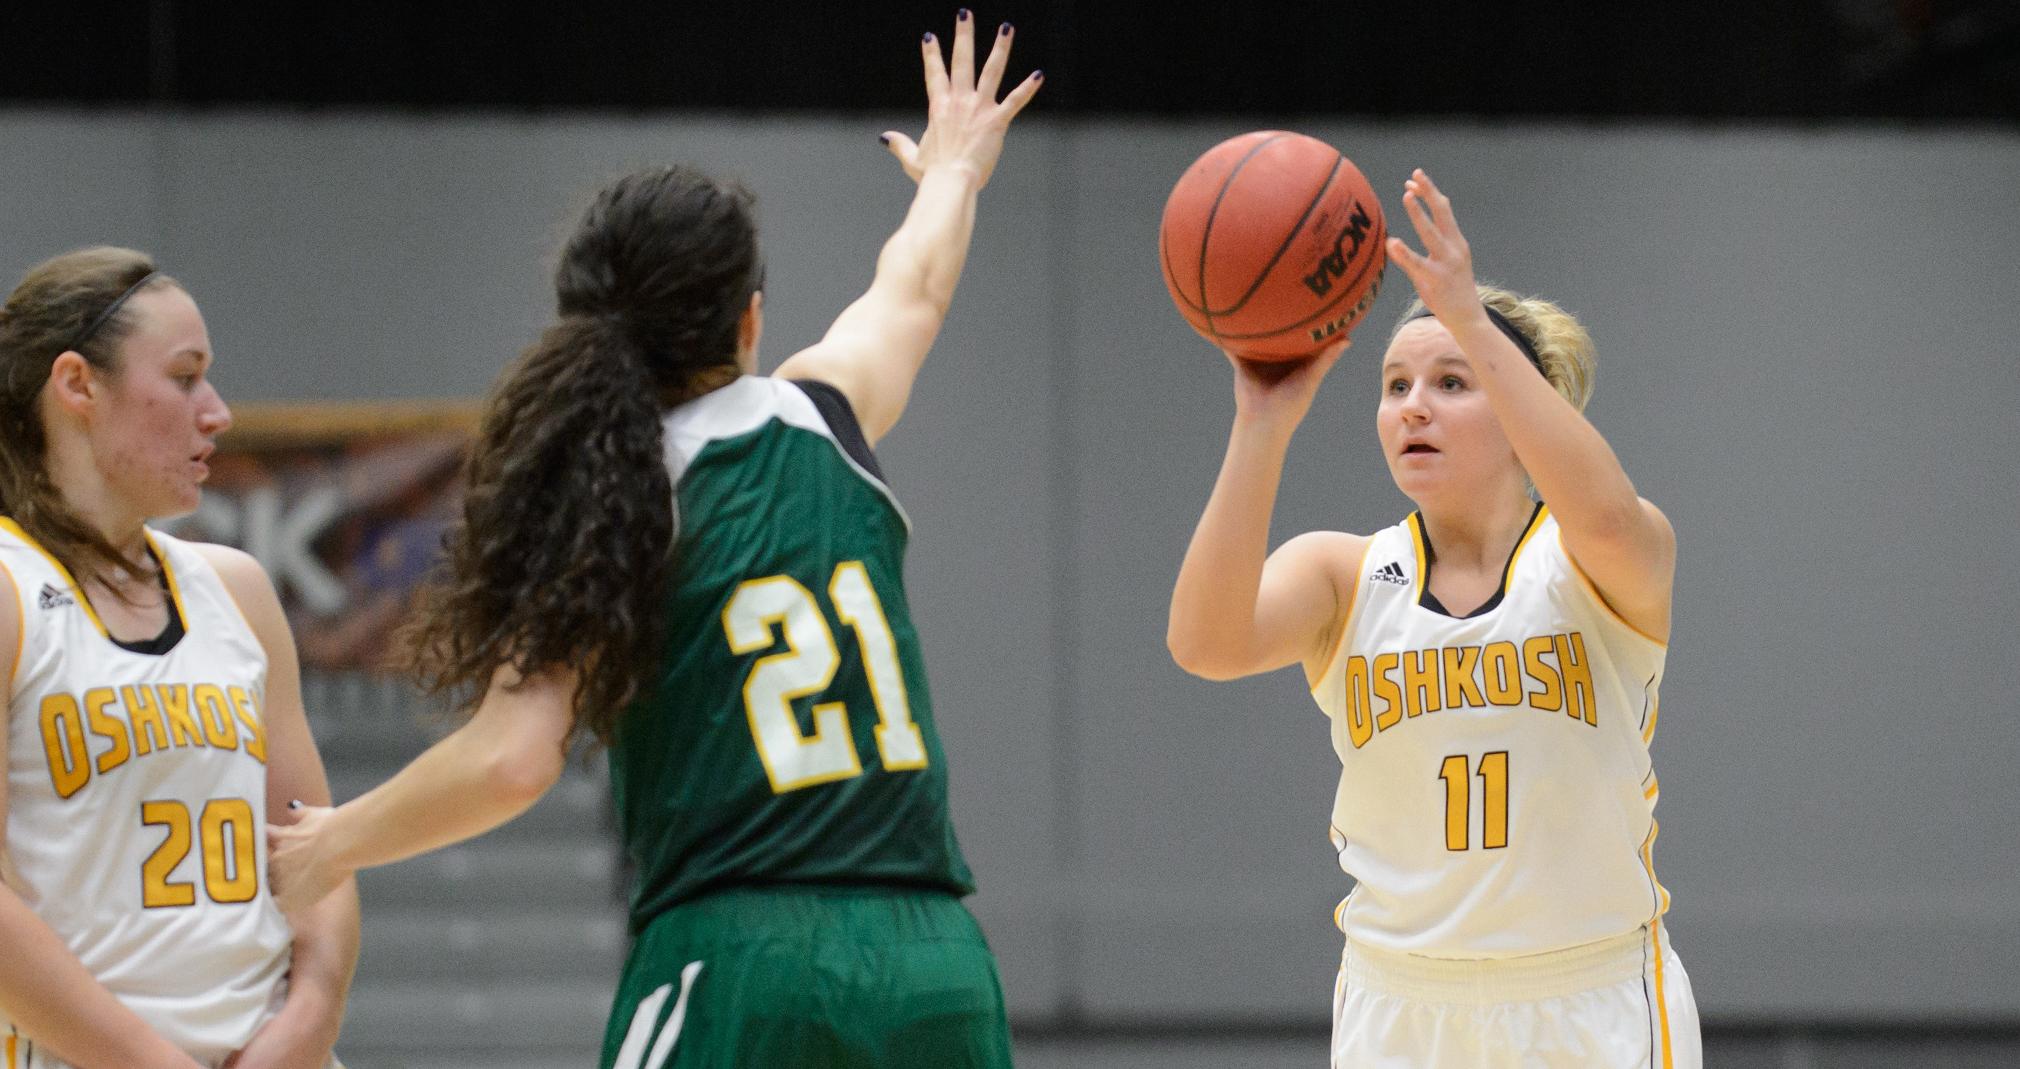 Emma Melotik scored 12 points against the Green Knights, including three 3-point baskets.